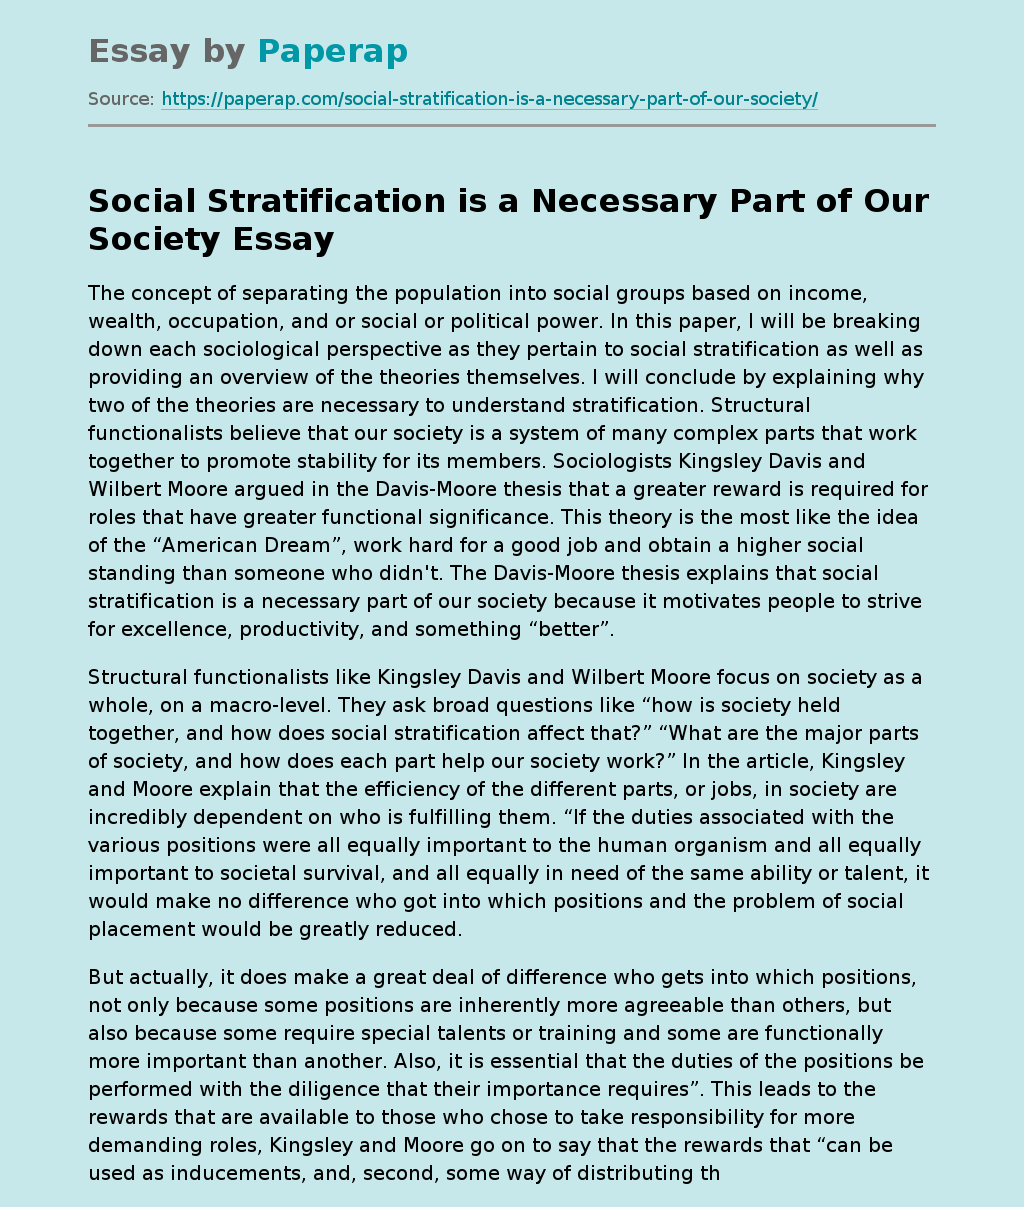 Social Stratification is a Necessary Part of Our Society